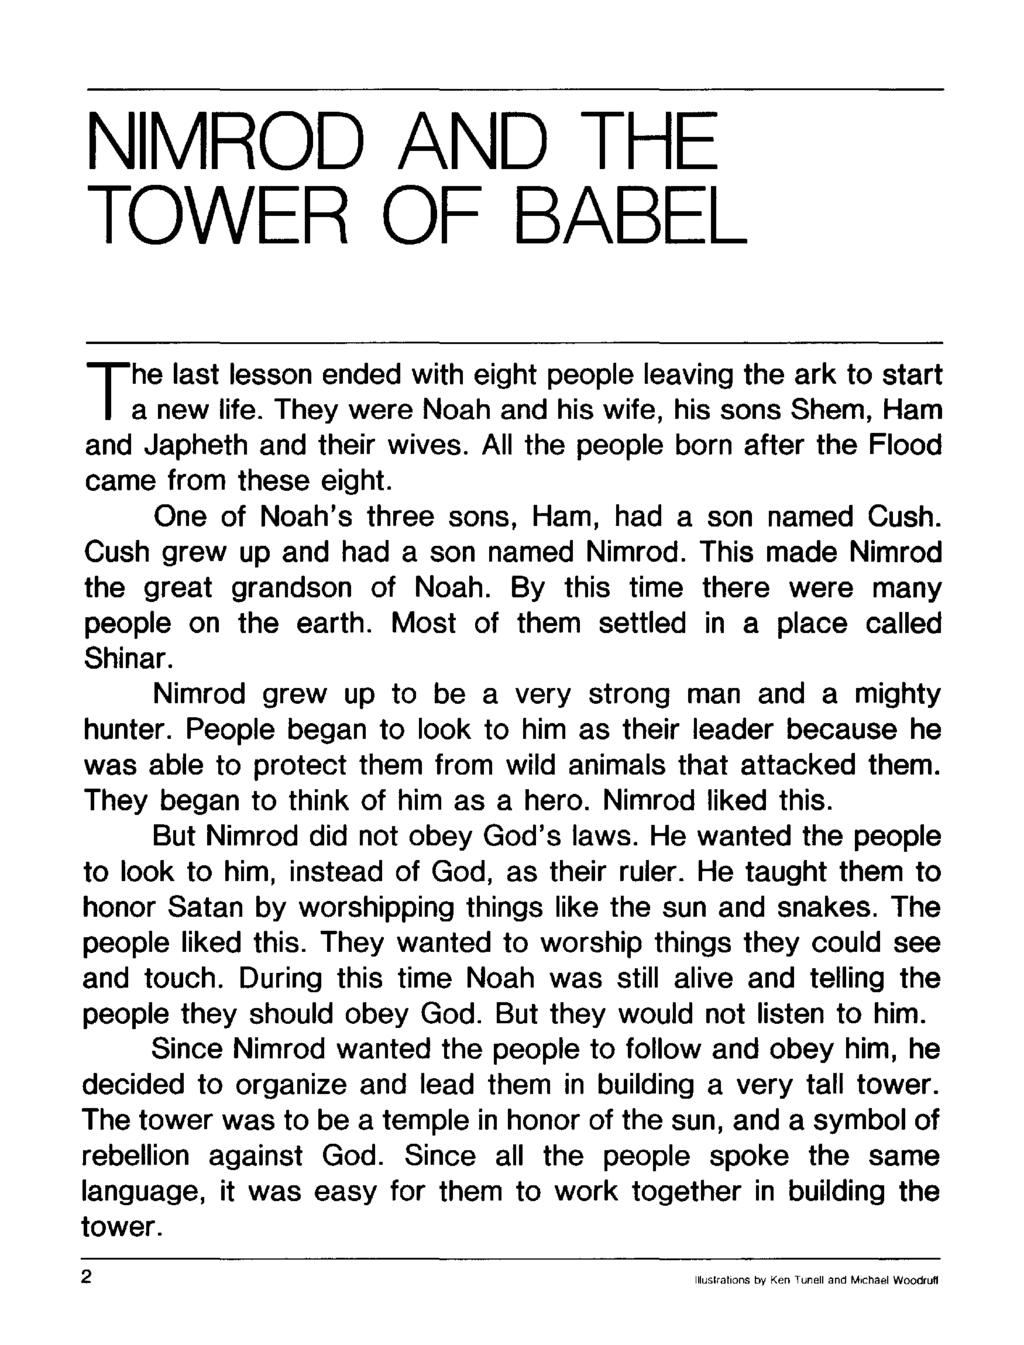 NIMROD AND THE TOWER OF BABEL The last lesson ended with eight people leaving the ark to start a new life. They were Noah and his wife, his sons Shem, Ham and Japheth and their wives.